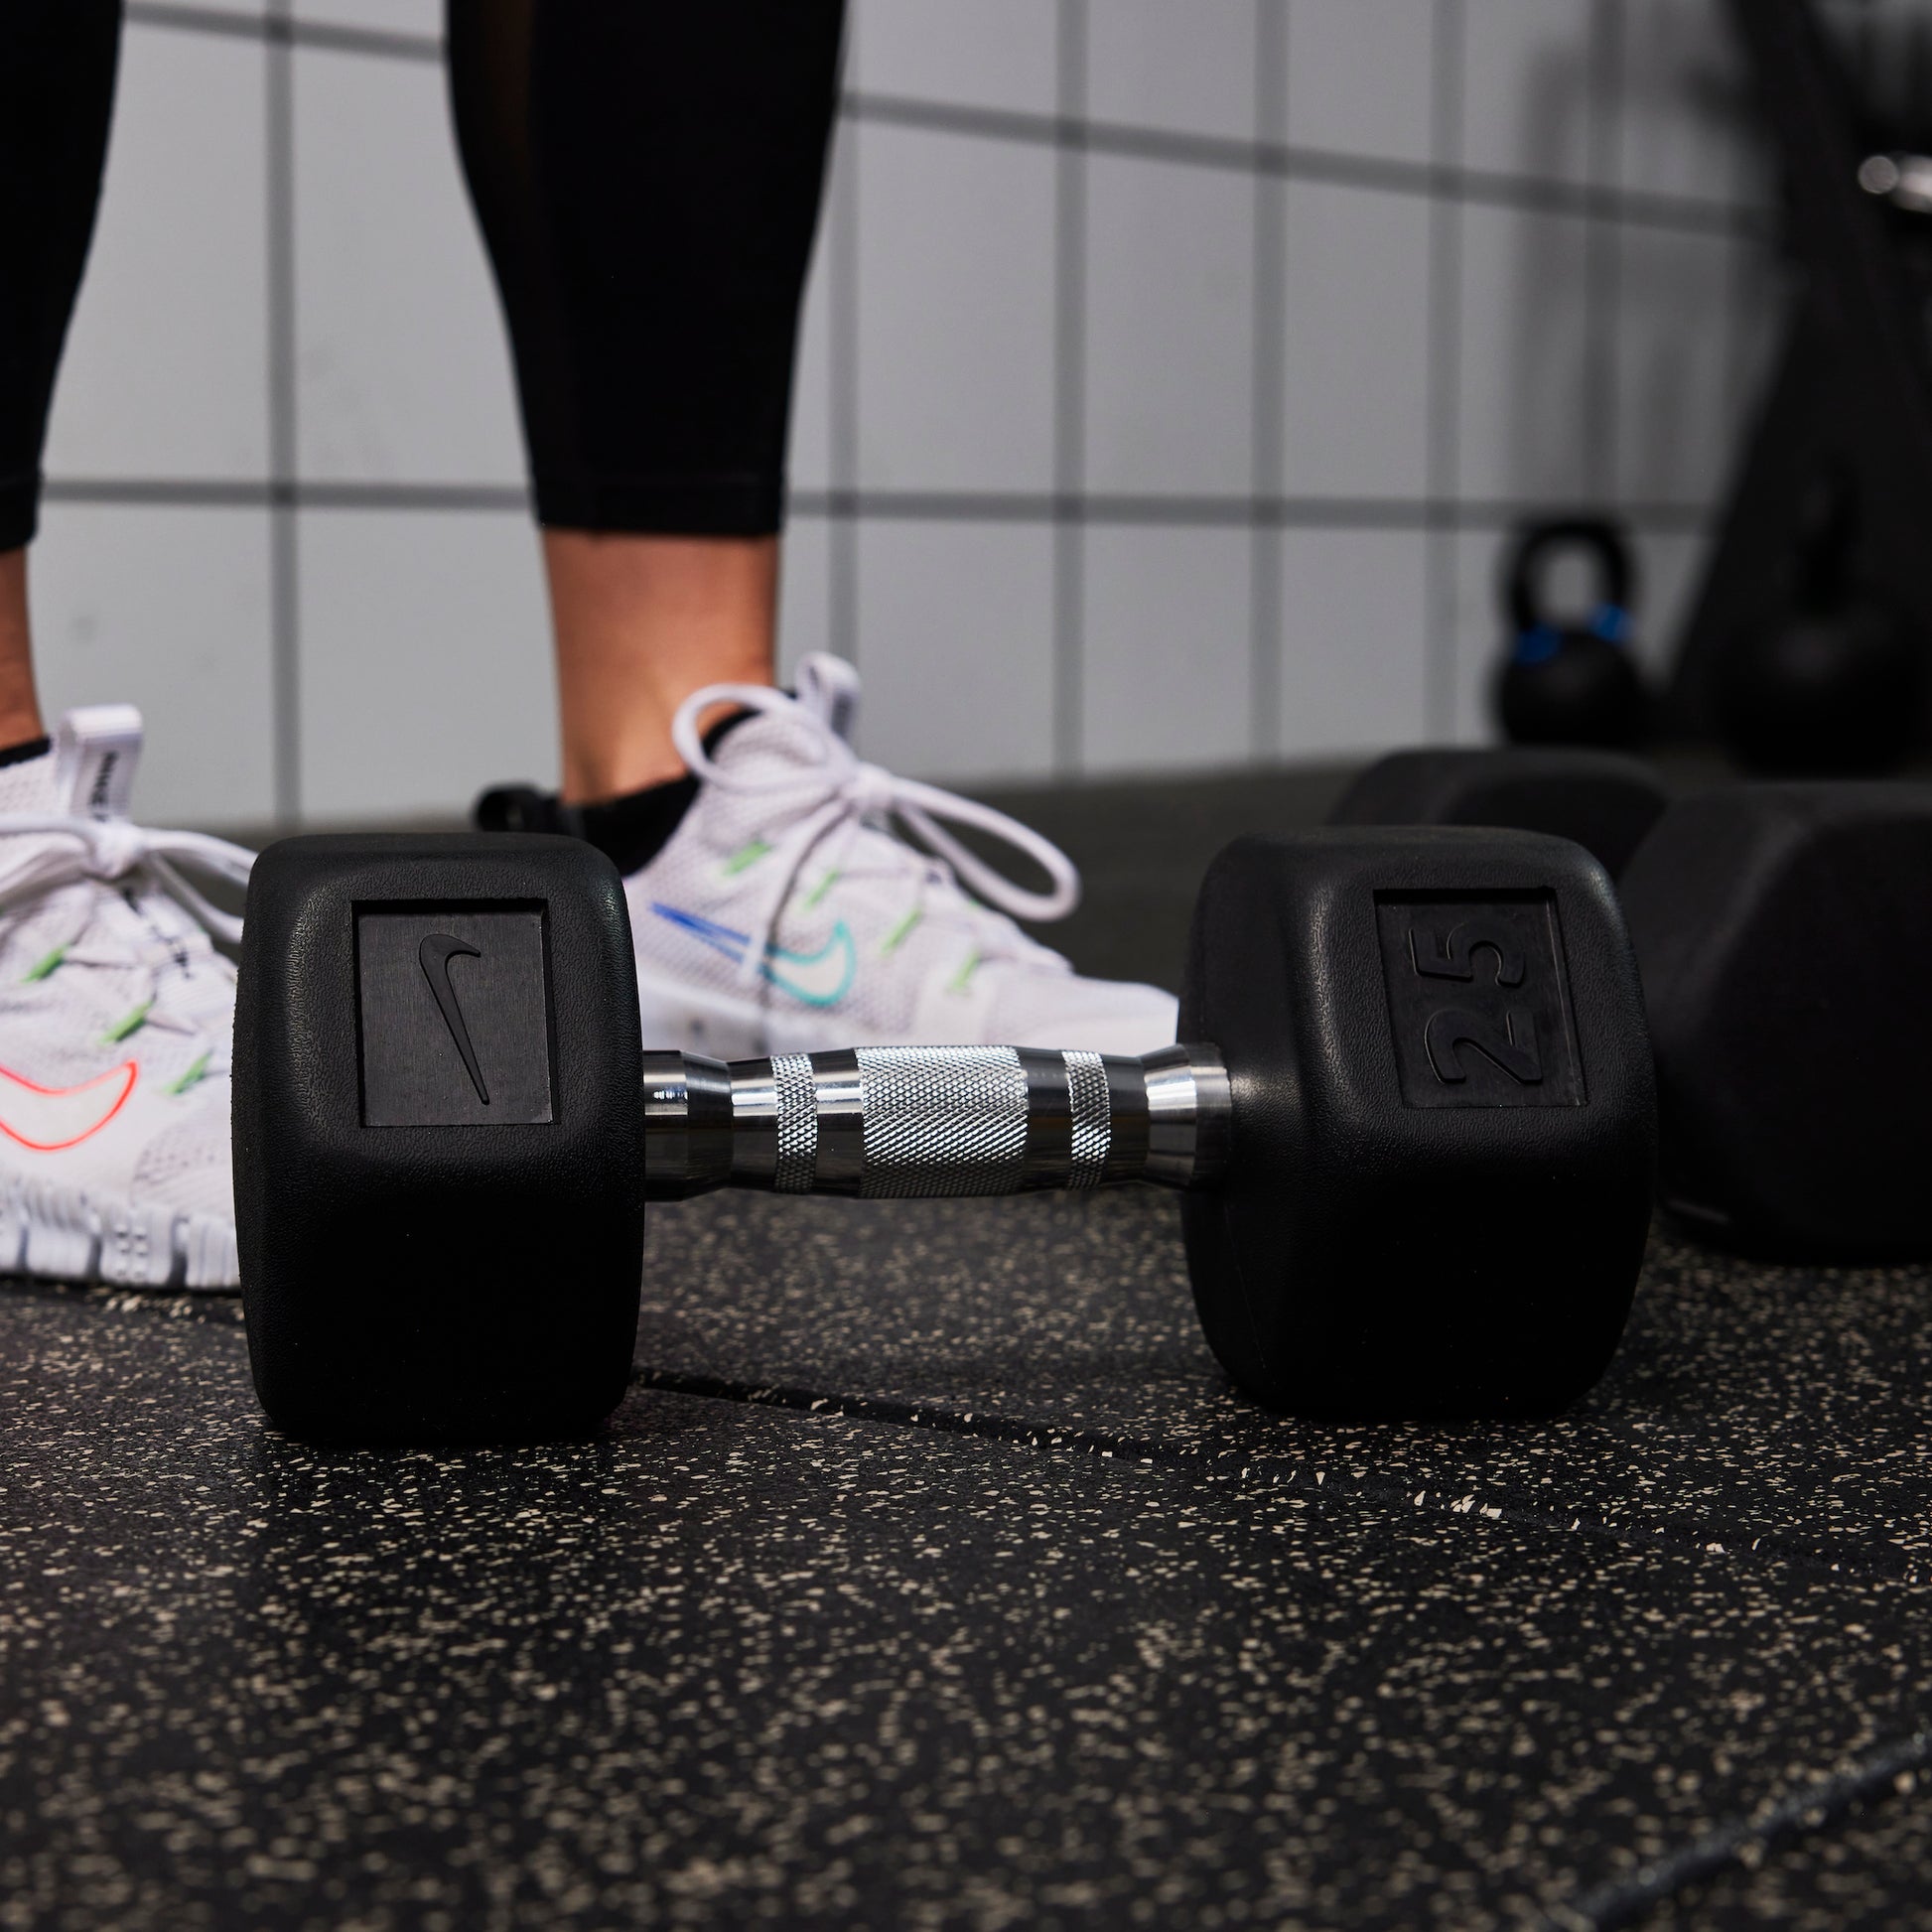 Nike Is Now Selling Strength Gym Equipment